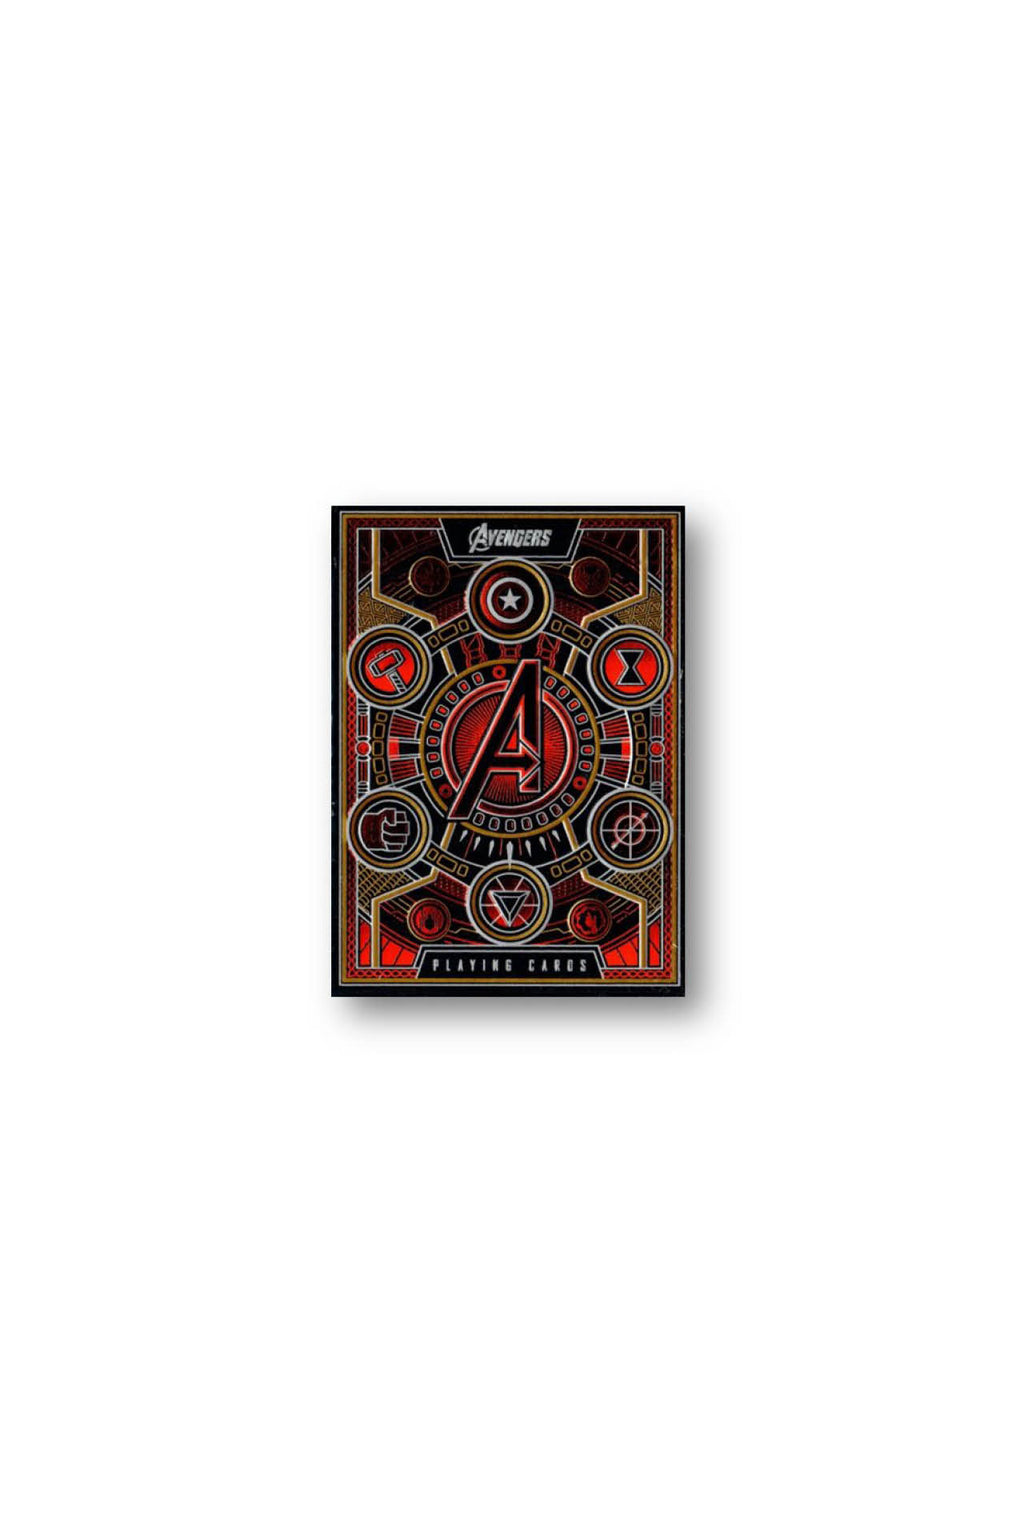 Avengers Playing Cards - The Infinity Saga Red Edition